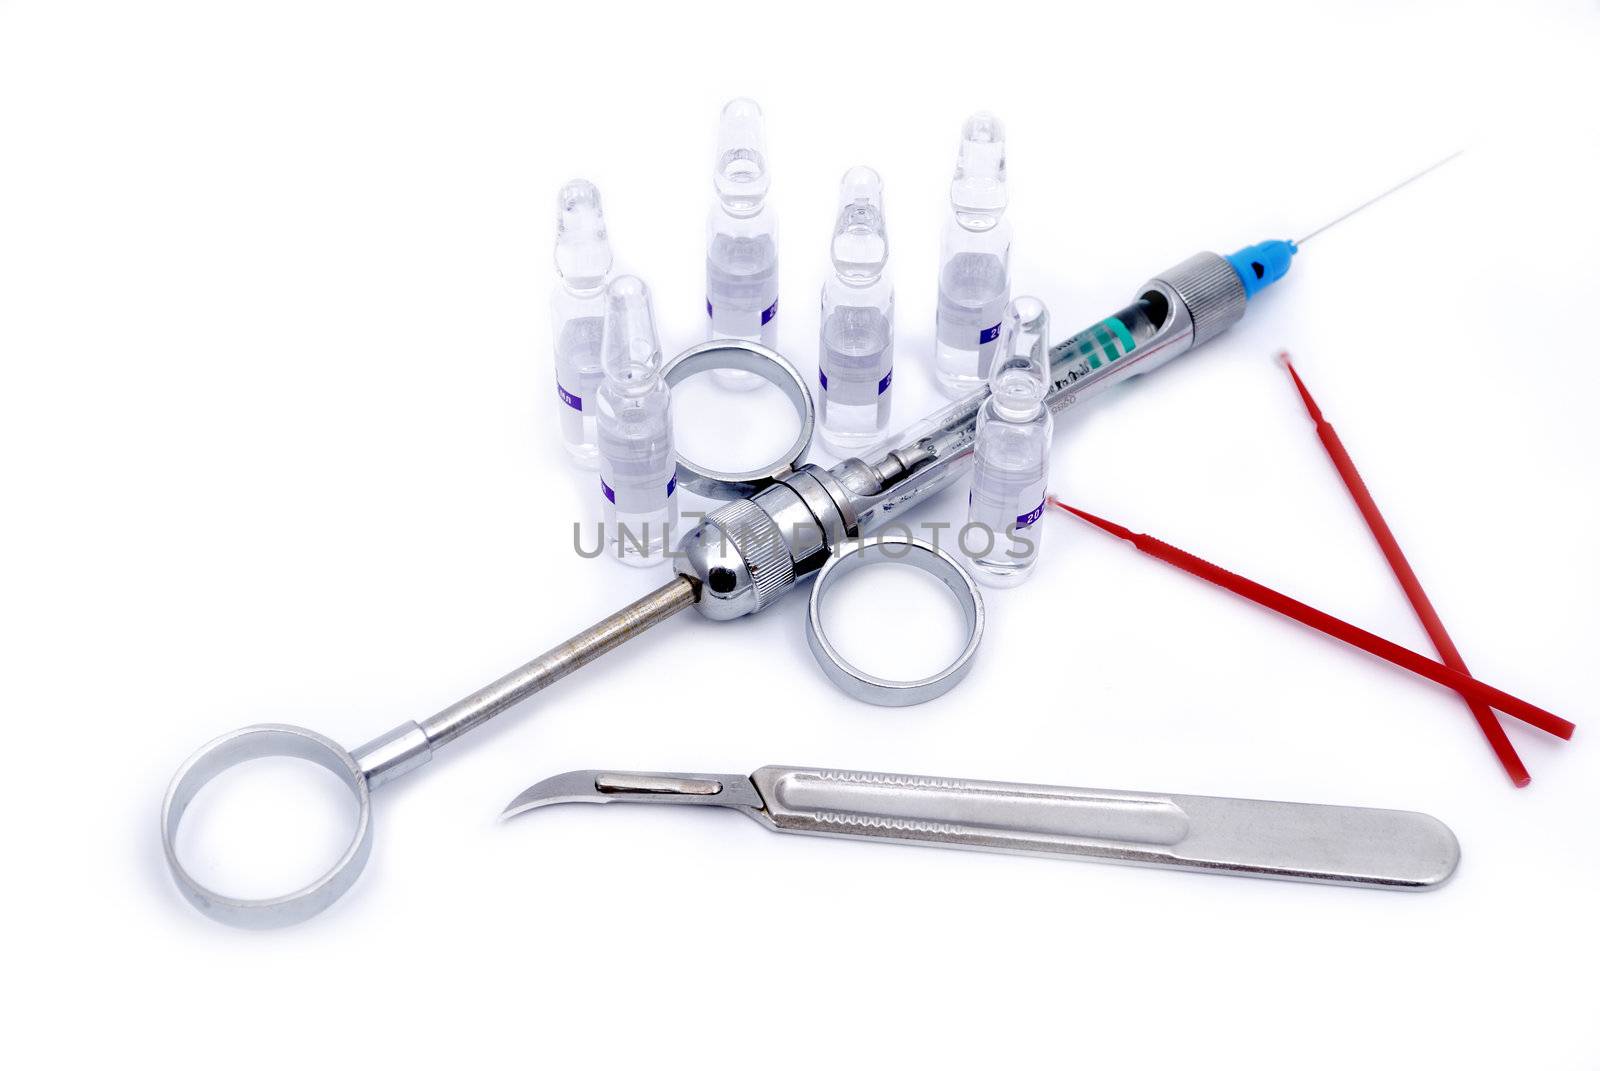 Medical instruments: a syringe, a scalpel and ampoules